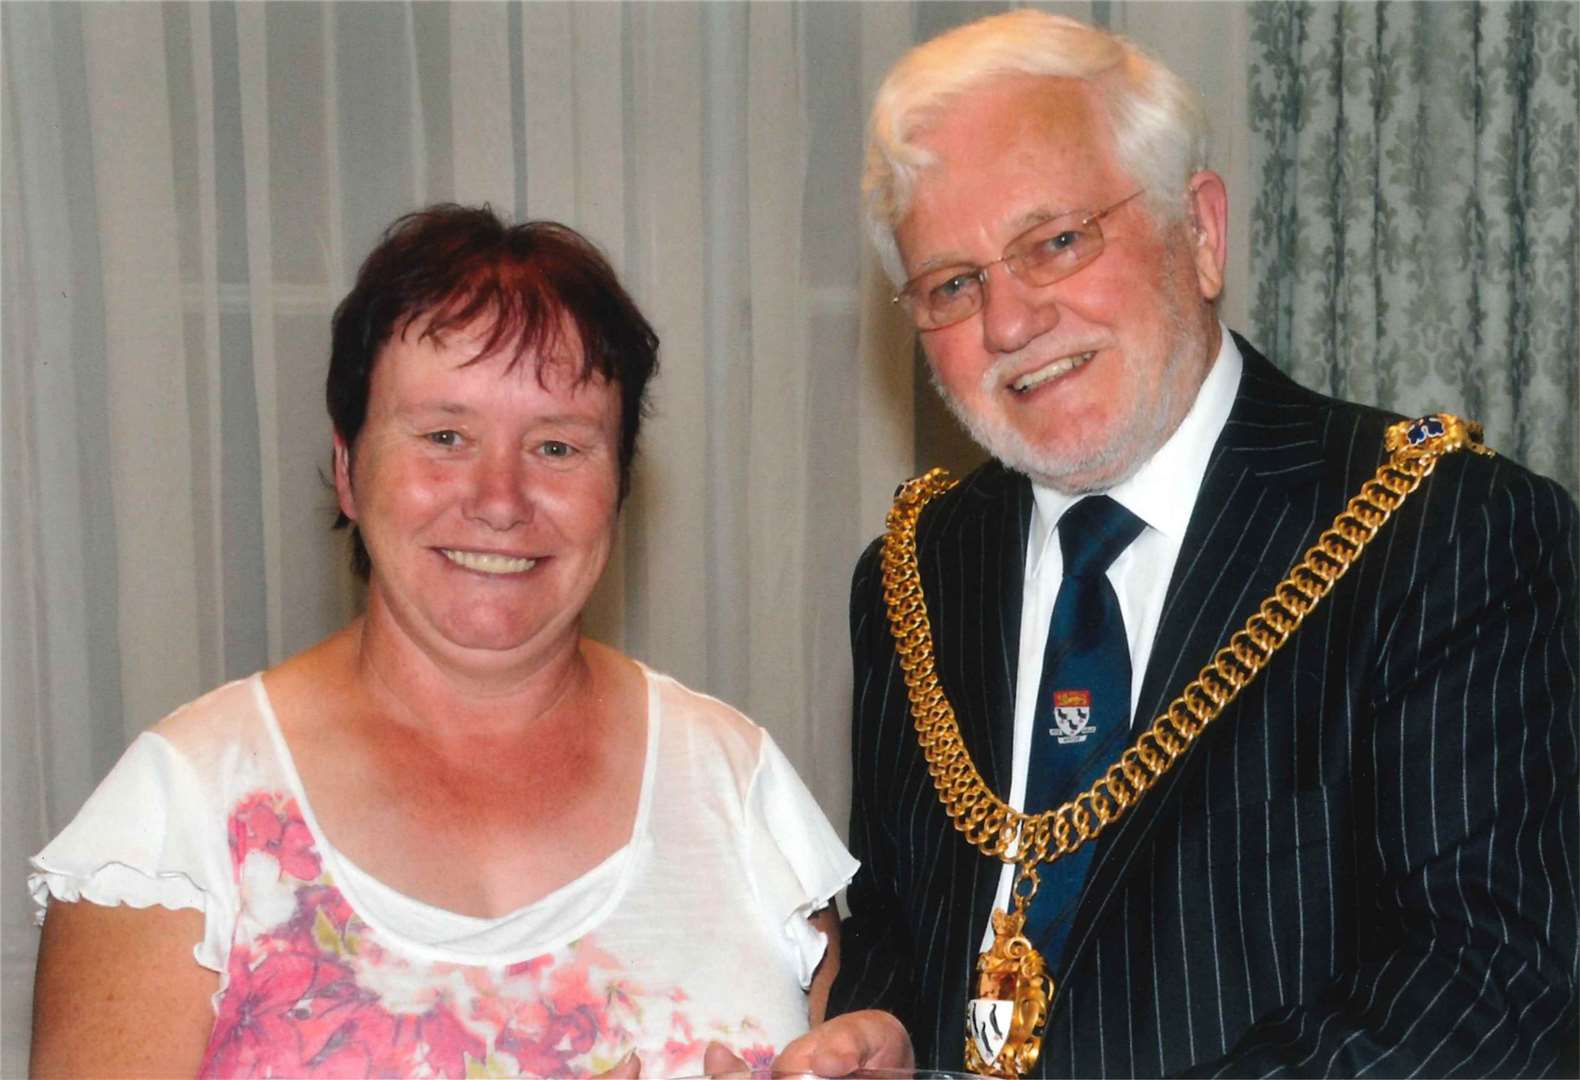 Pat Cook received the Lord Mayor's Community Award in 2012